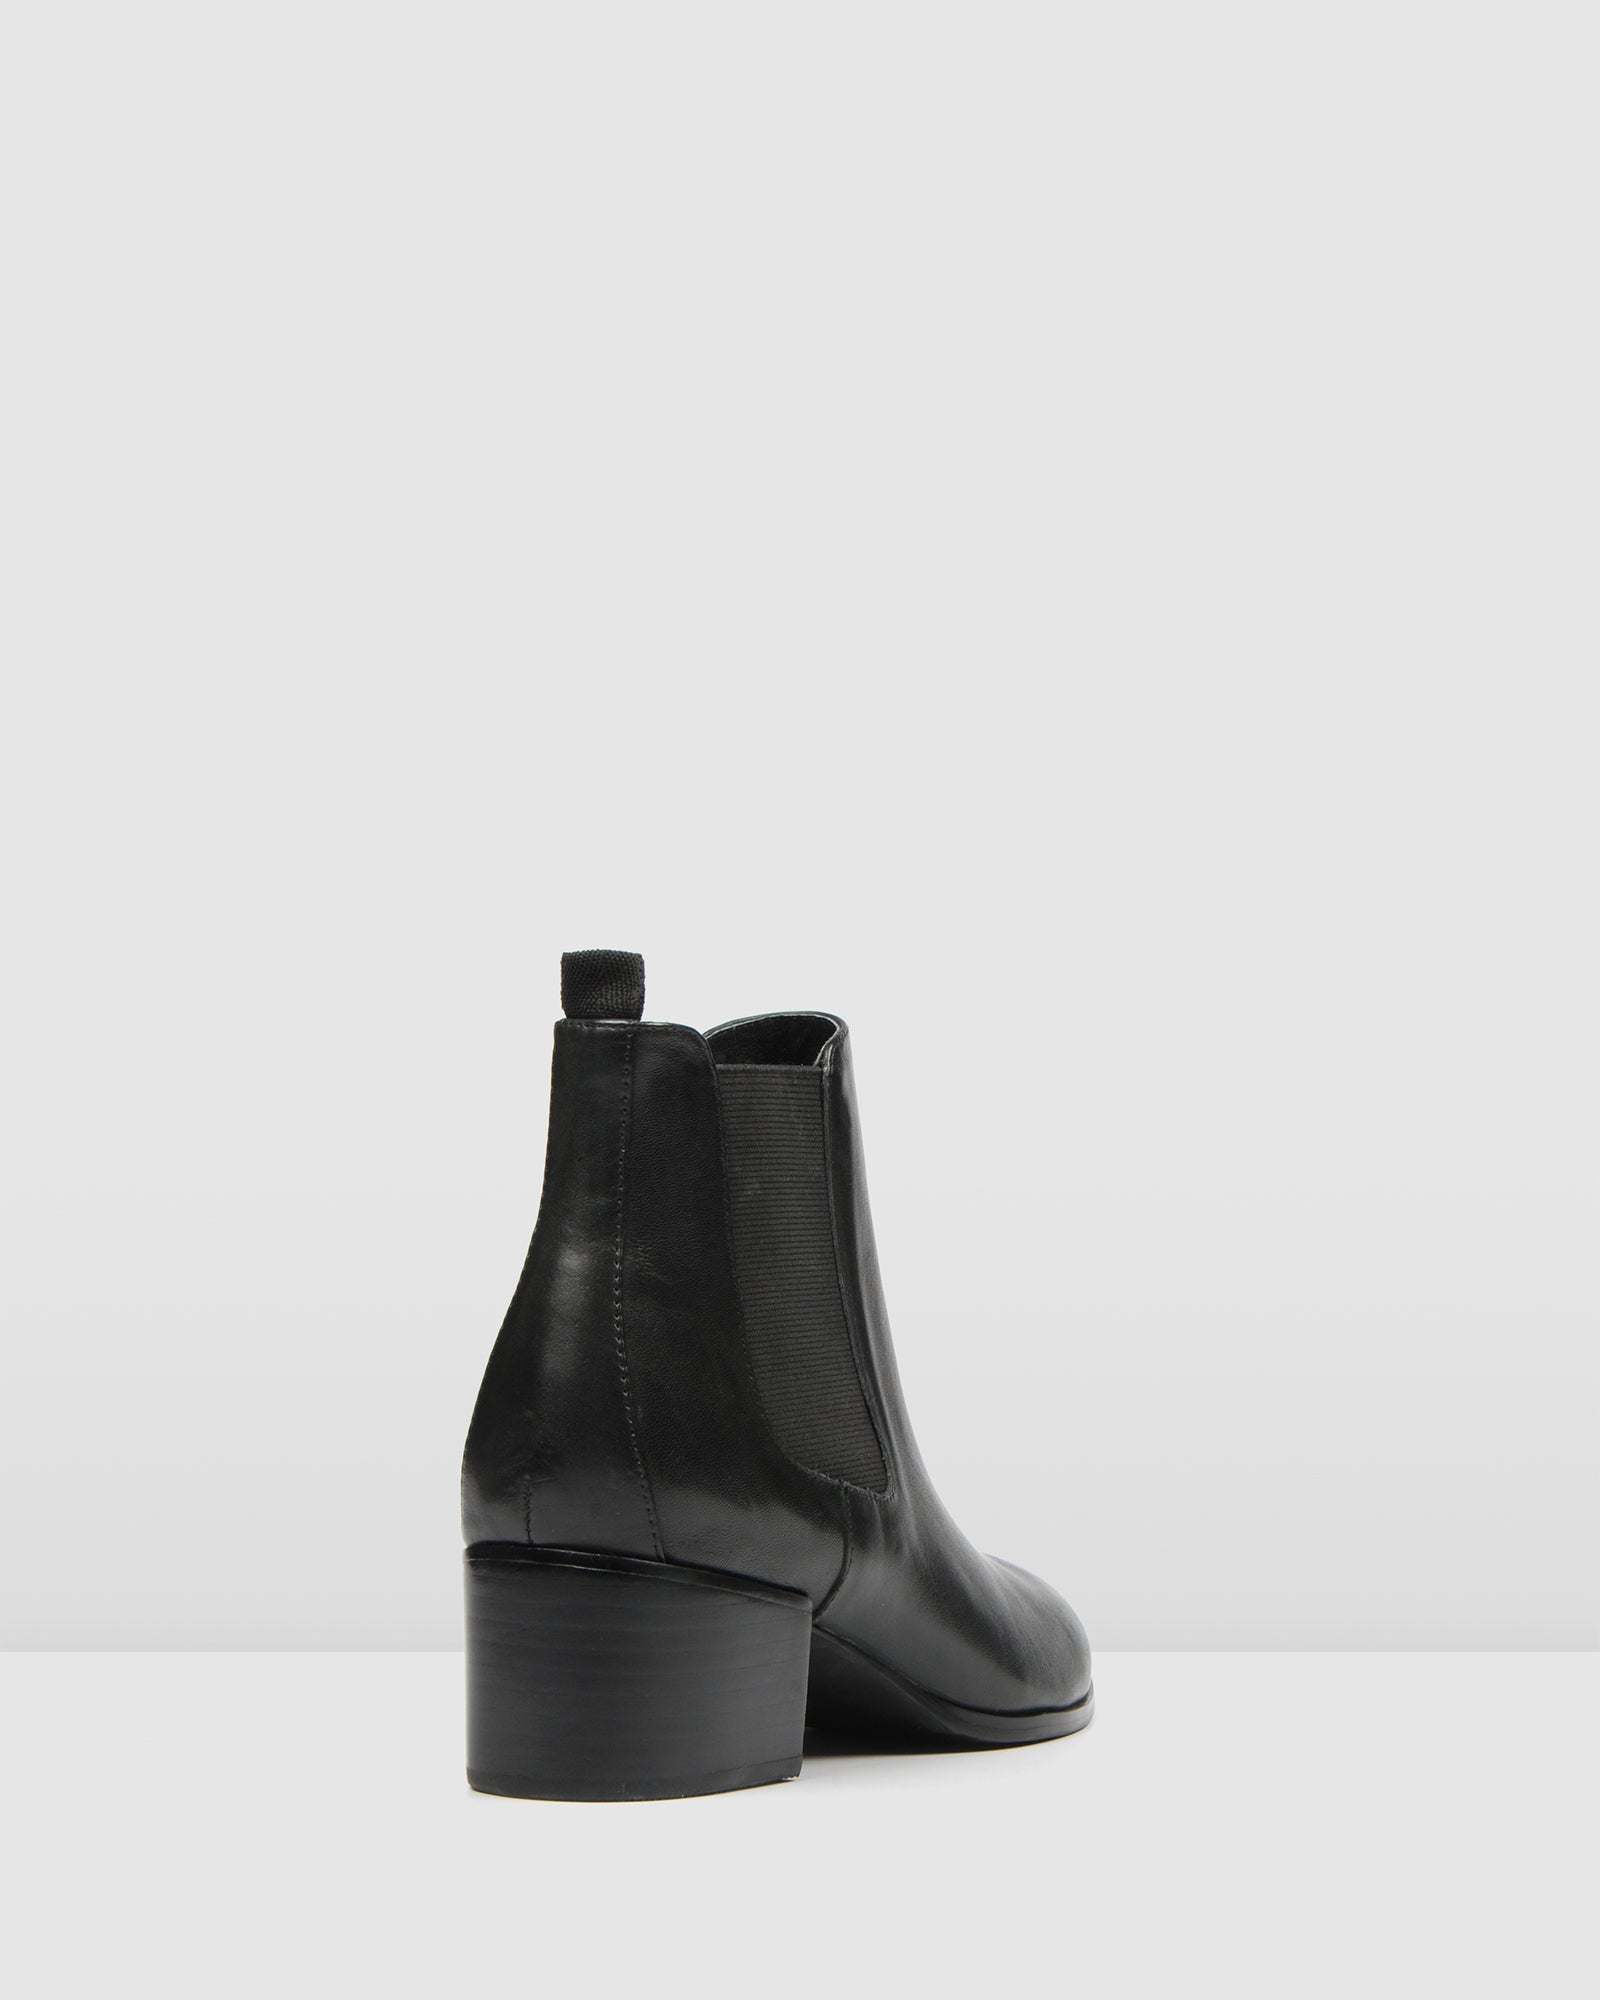 MONSTER MID ANKLE BOOTS BLACK LEATHER 